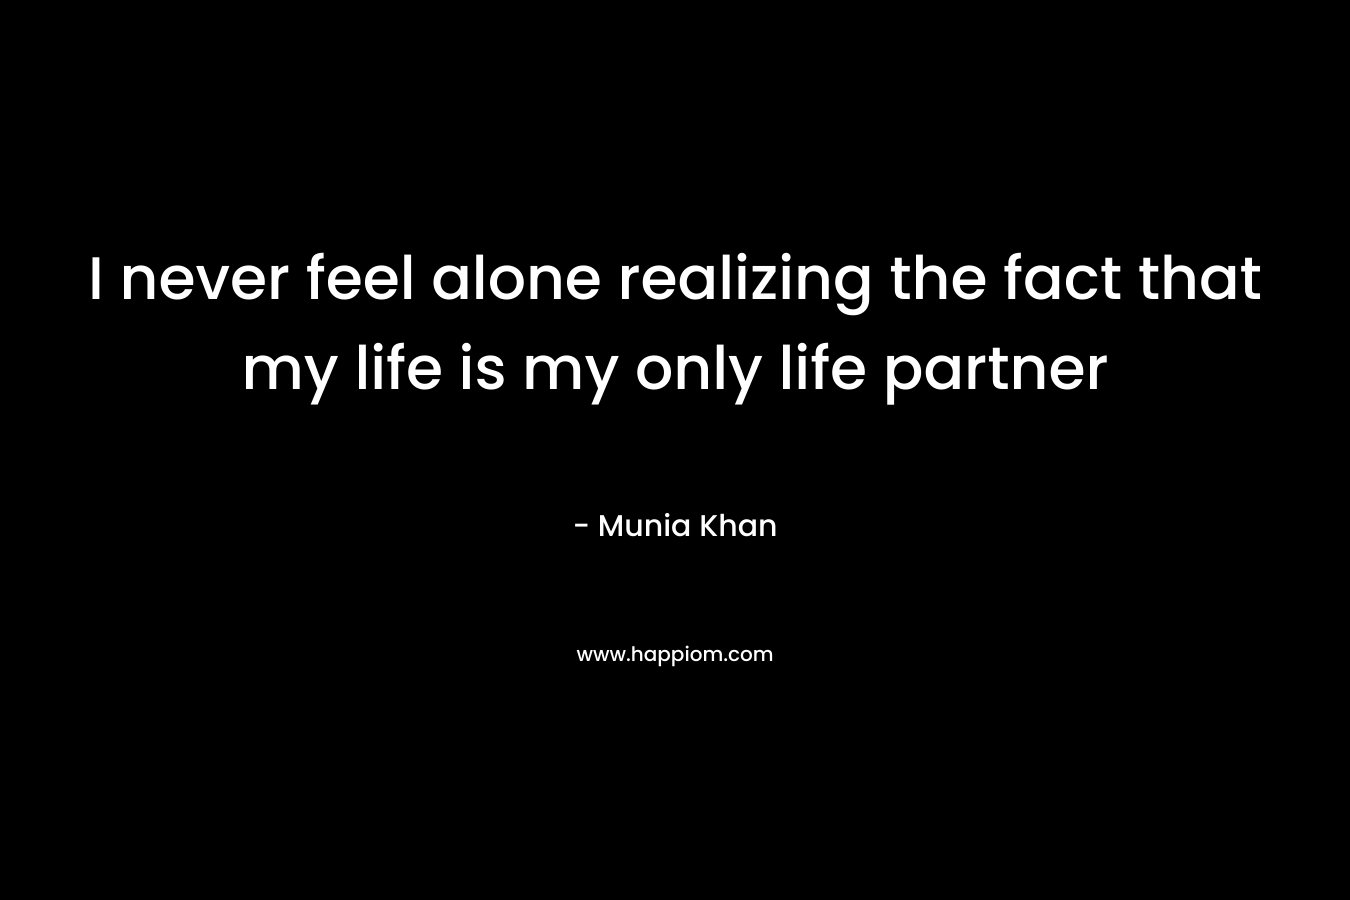 I never feel alone realizing the fact that my life is my only life partner